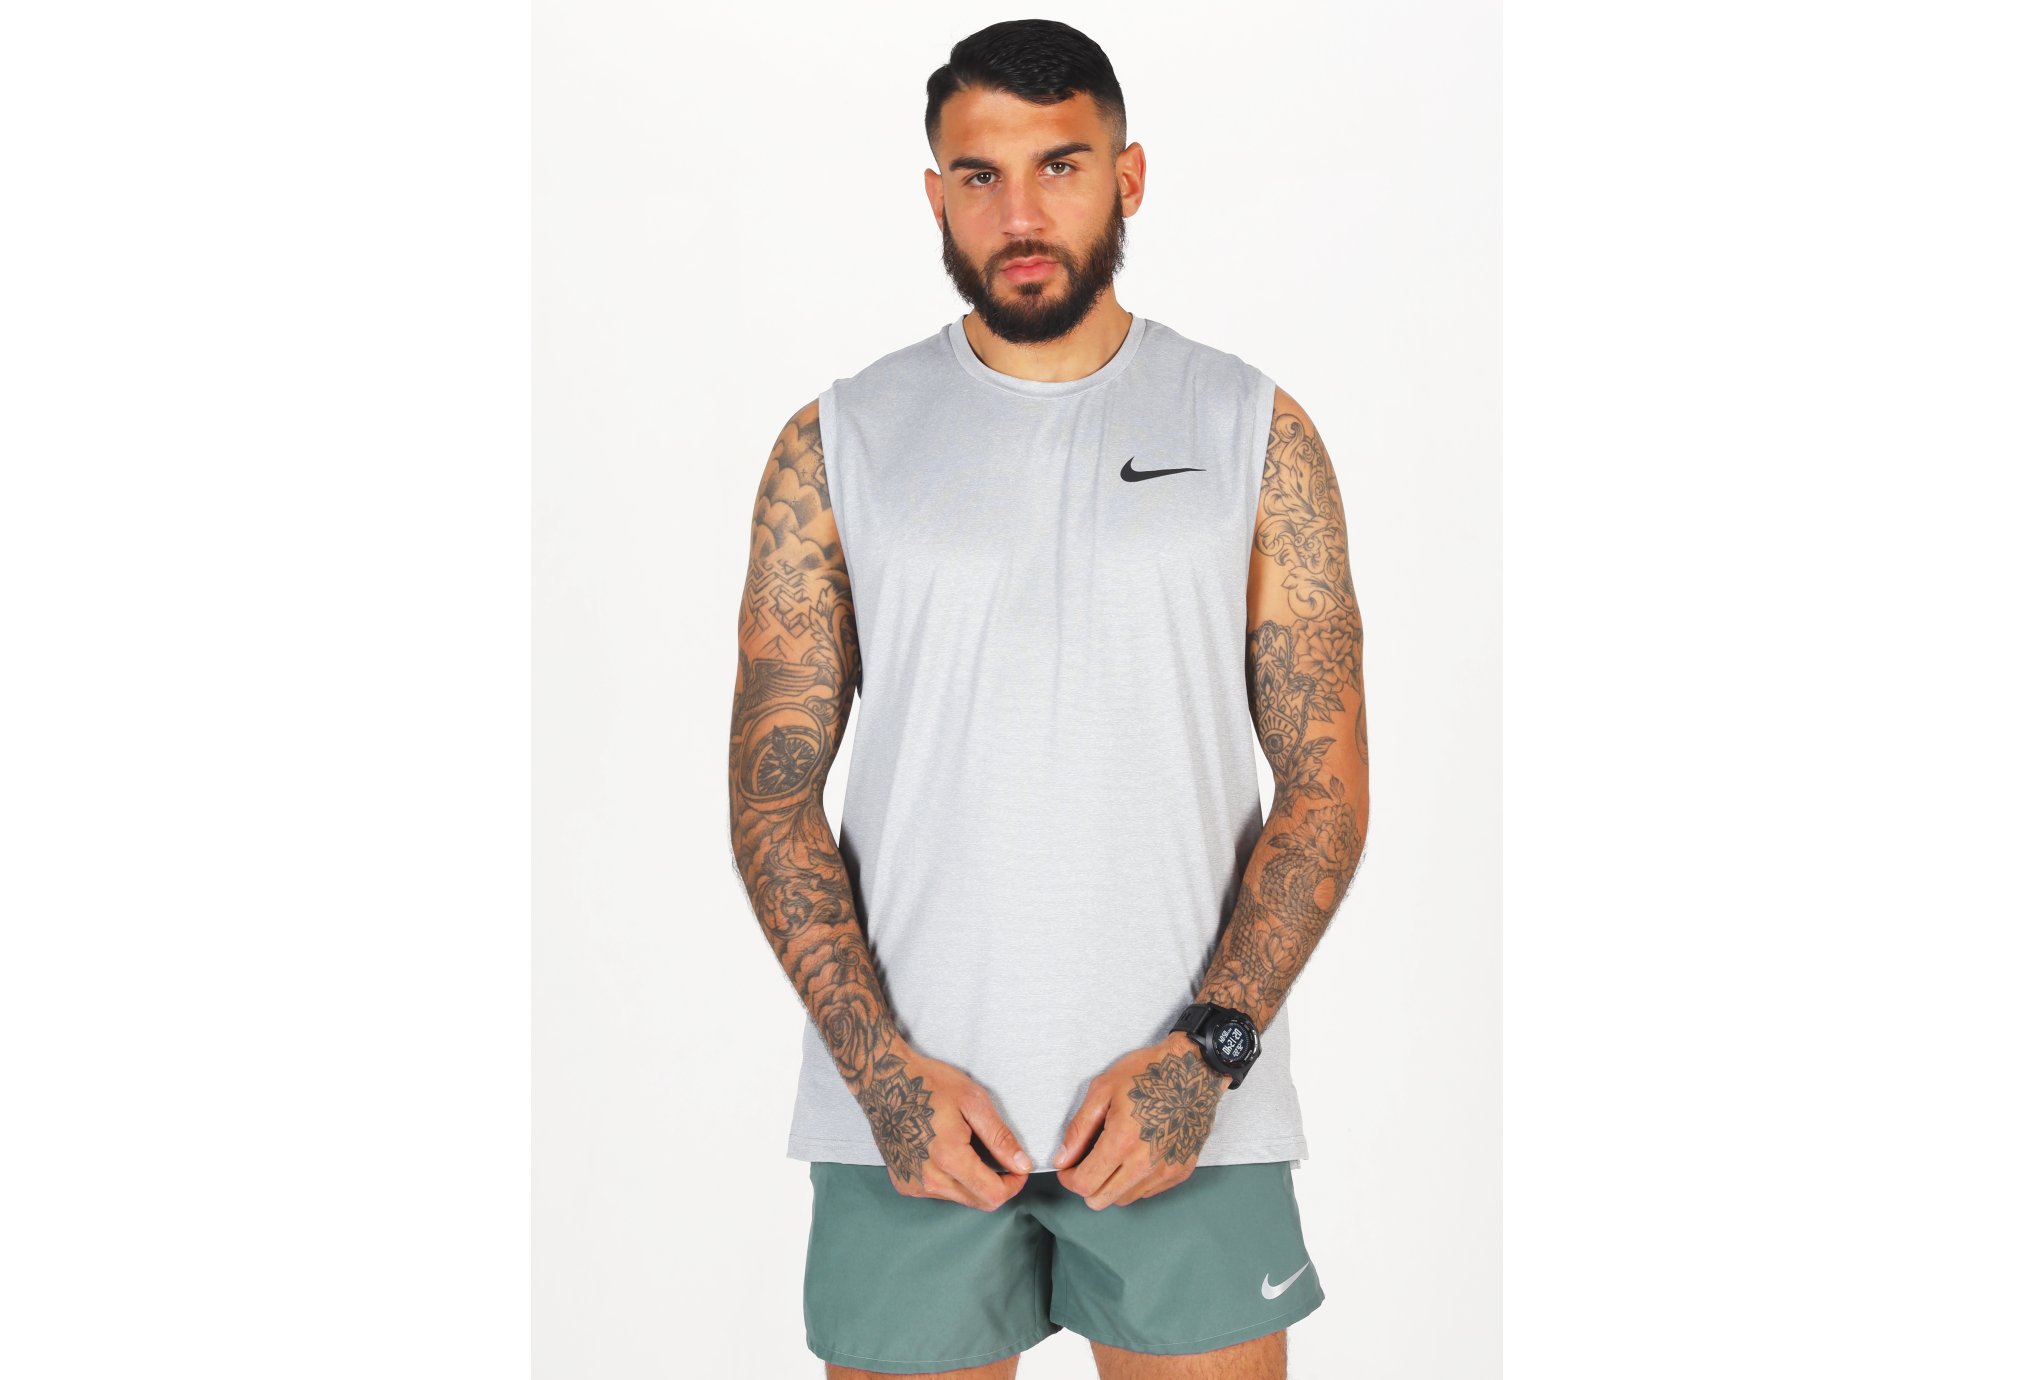 Débardeur Homme Nike Dri Fit Total 90 Taille S Comme Neuf